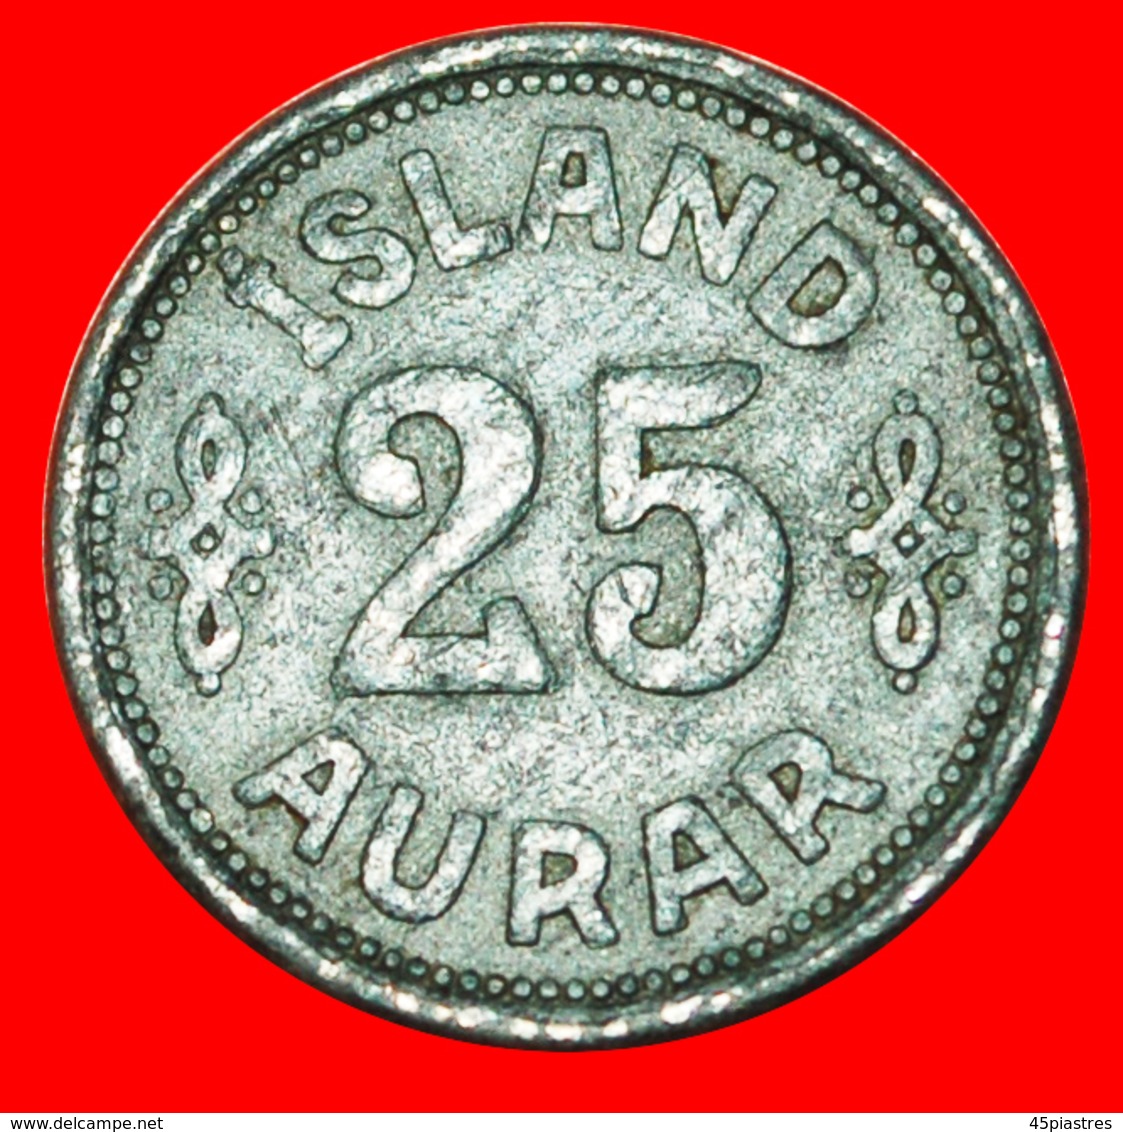 # GREAT BRITAIN: ICELAND ★ 25 ORE 1942 WARTIME (1939-1945)! LOW START ★ NO RESERVE! - Islandia